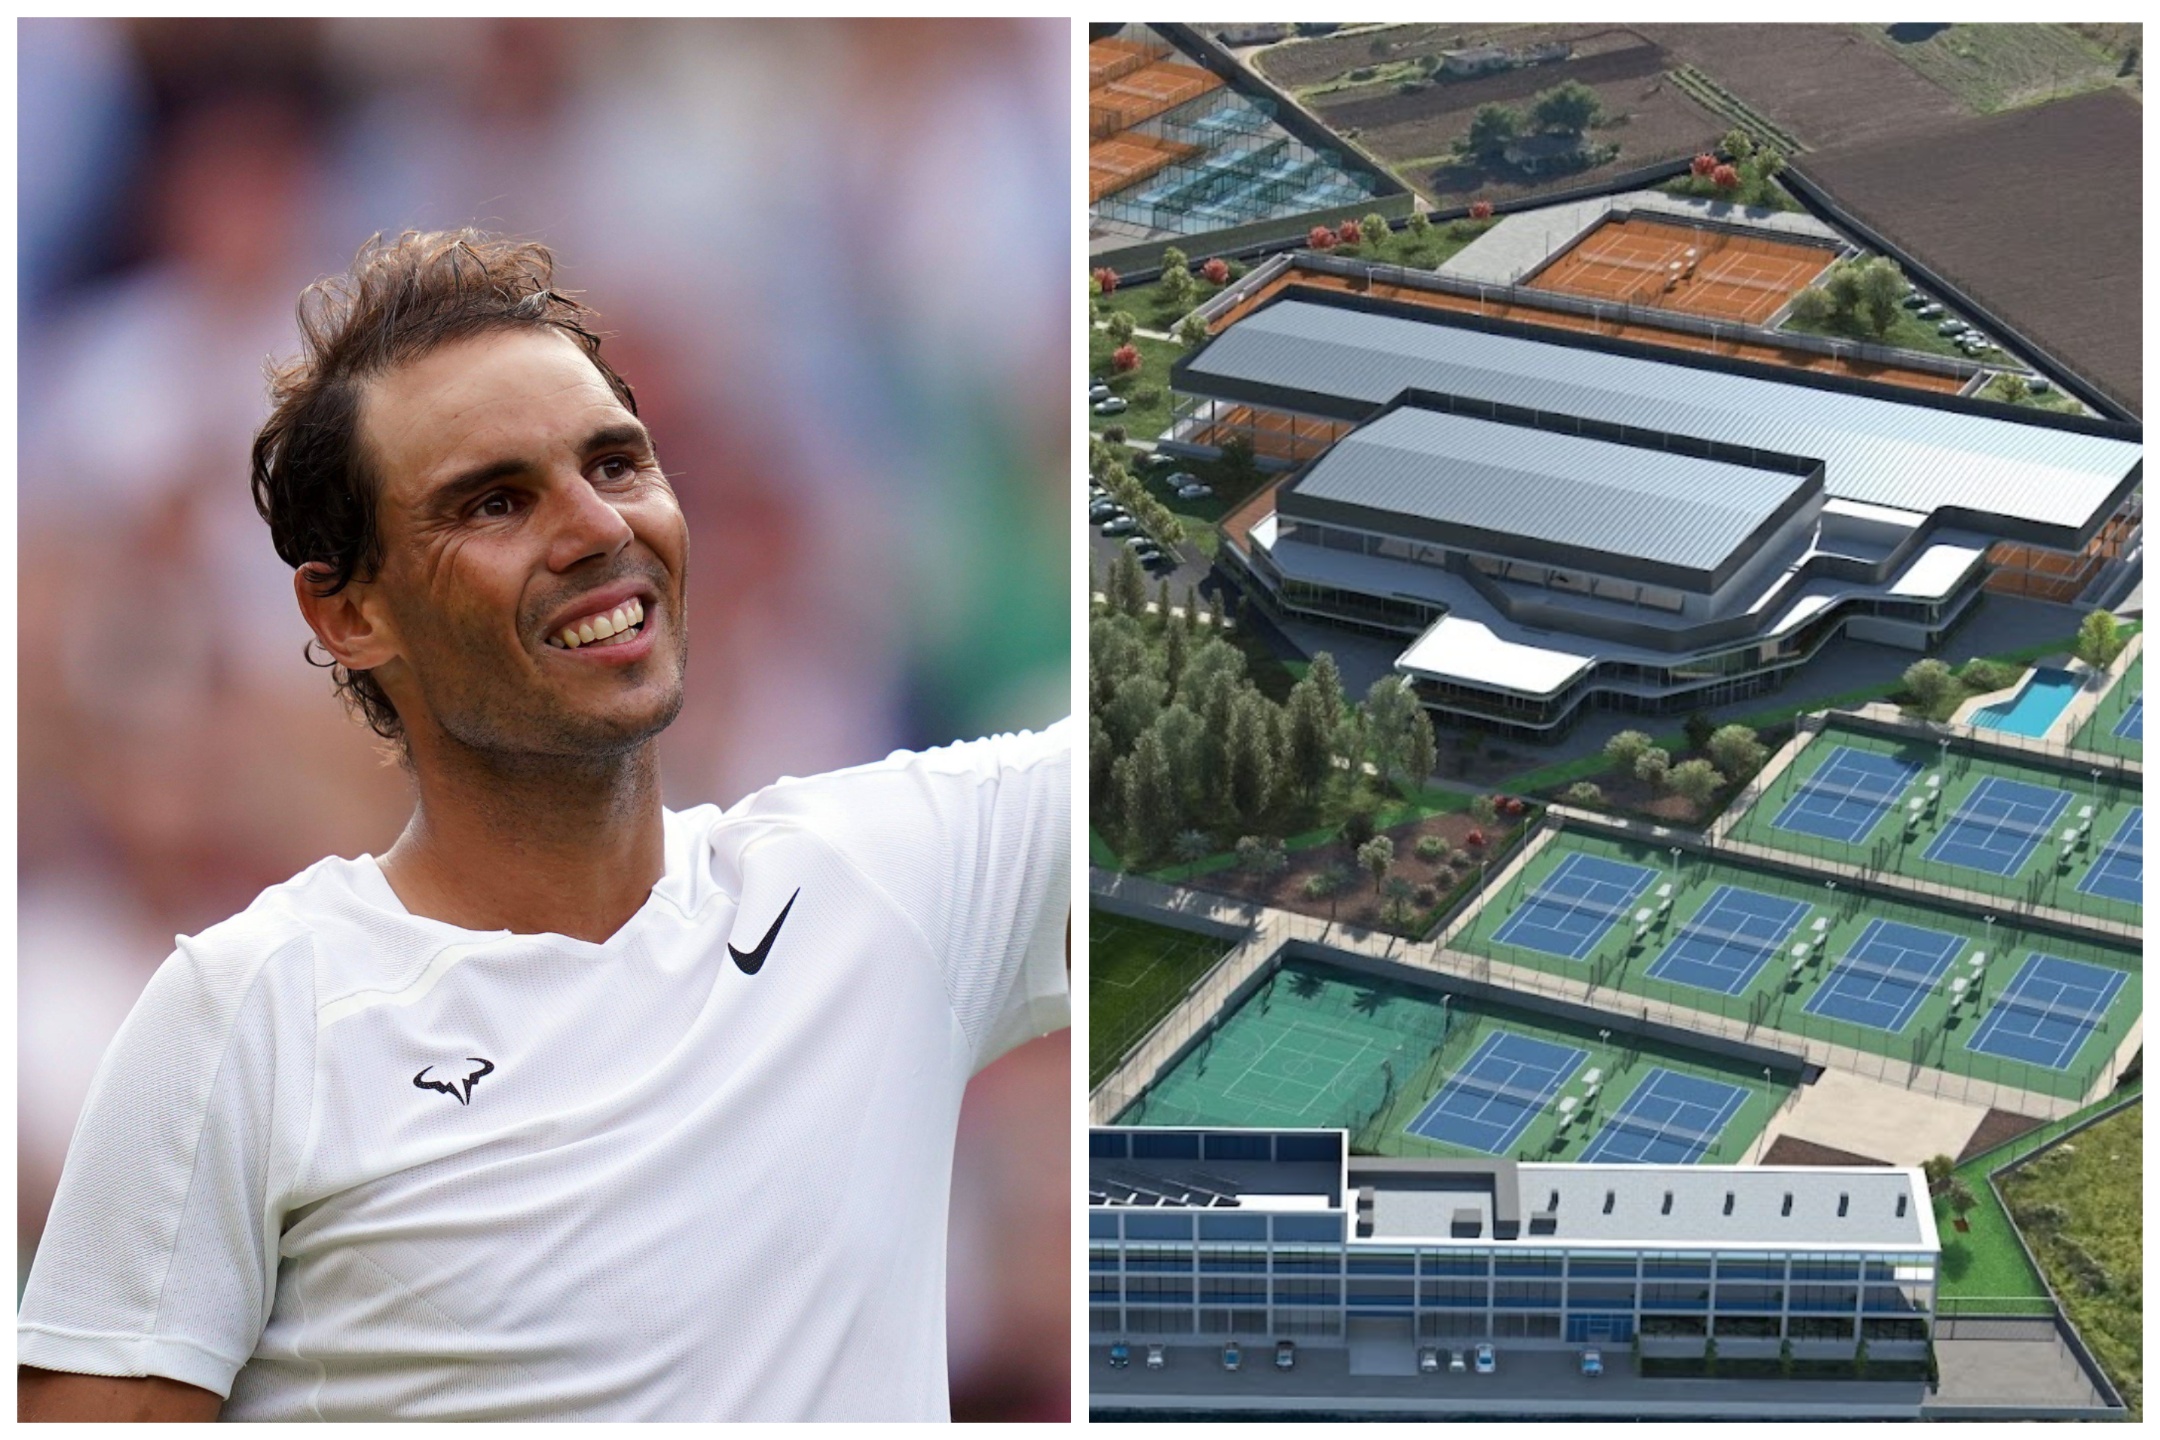 The best way to start 2023? Come and - Rafa Nadal Academy